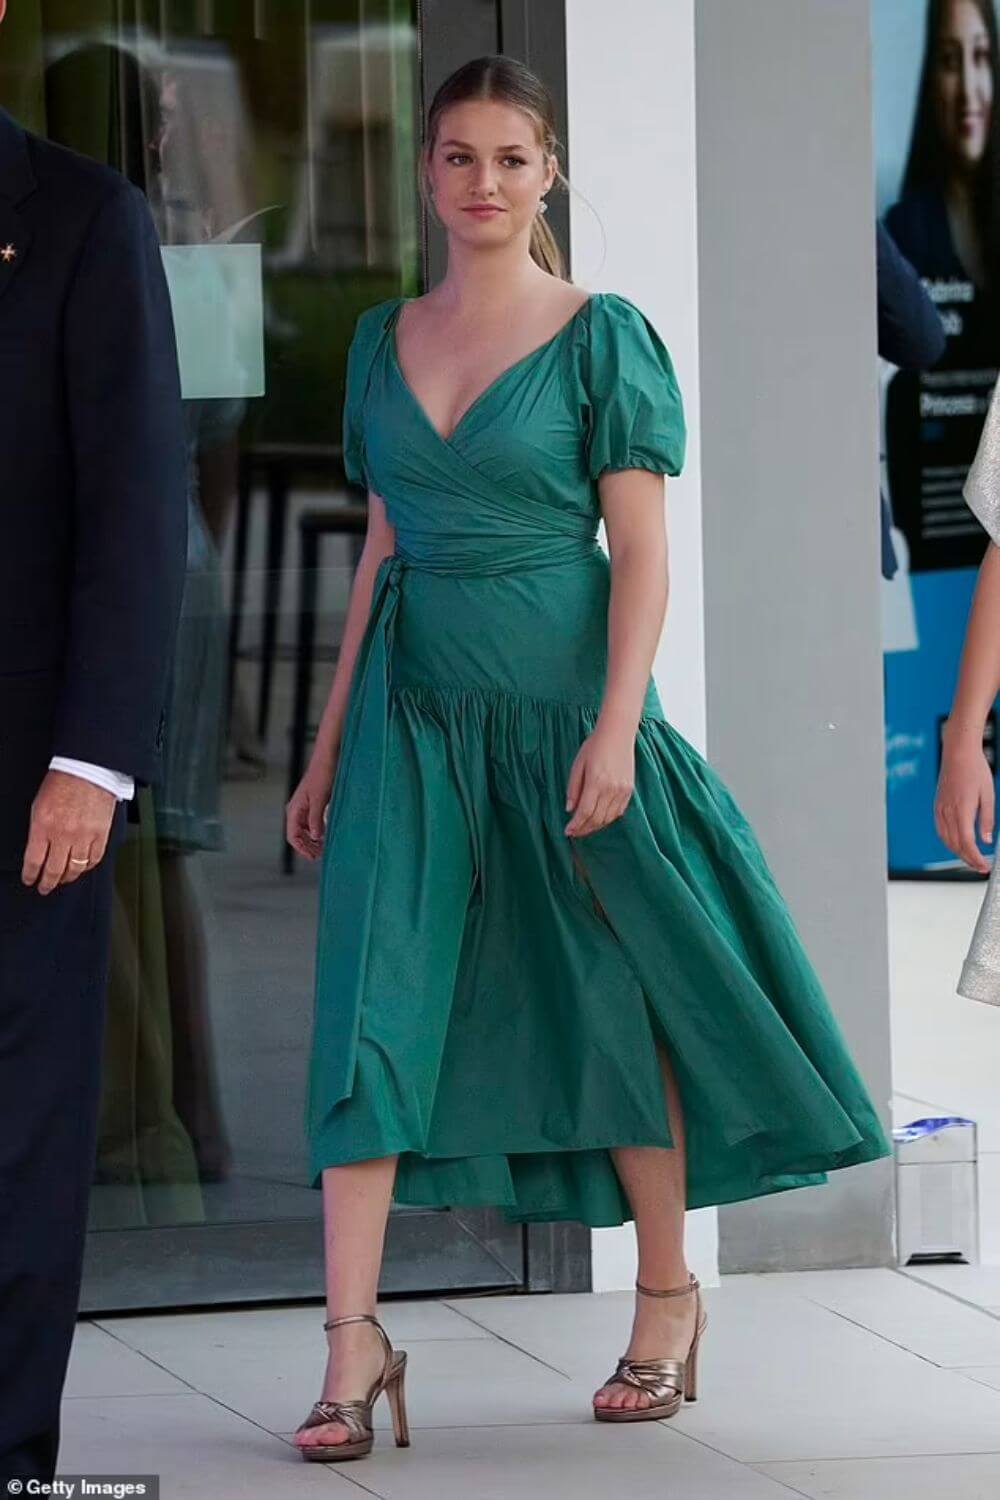 Princess Leonor in an emerald green gown